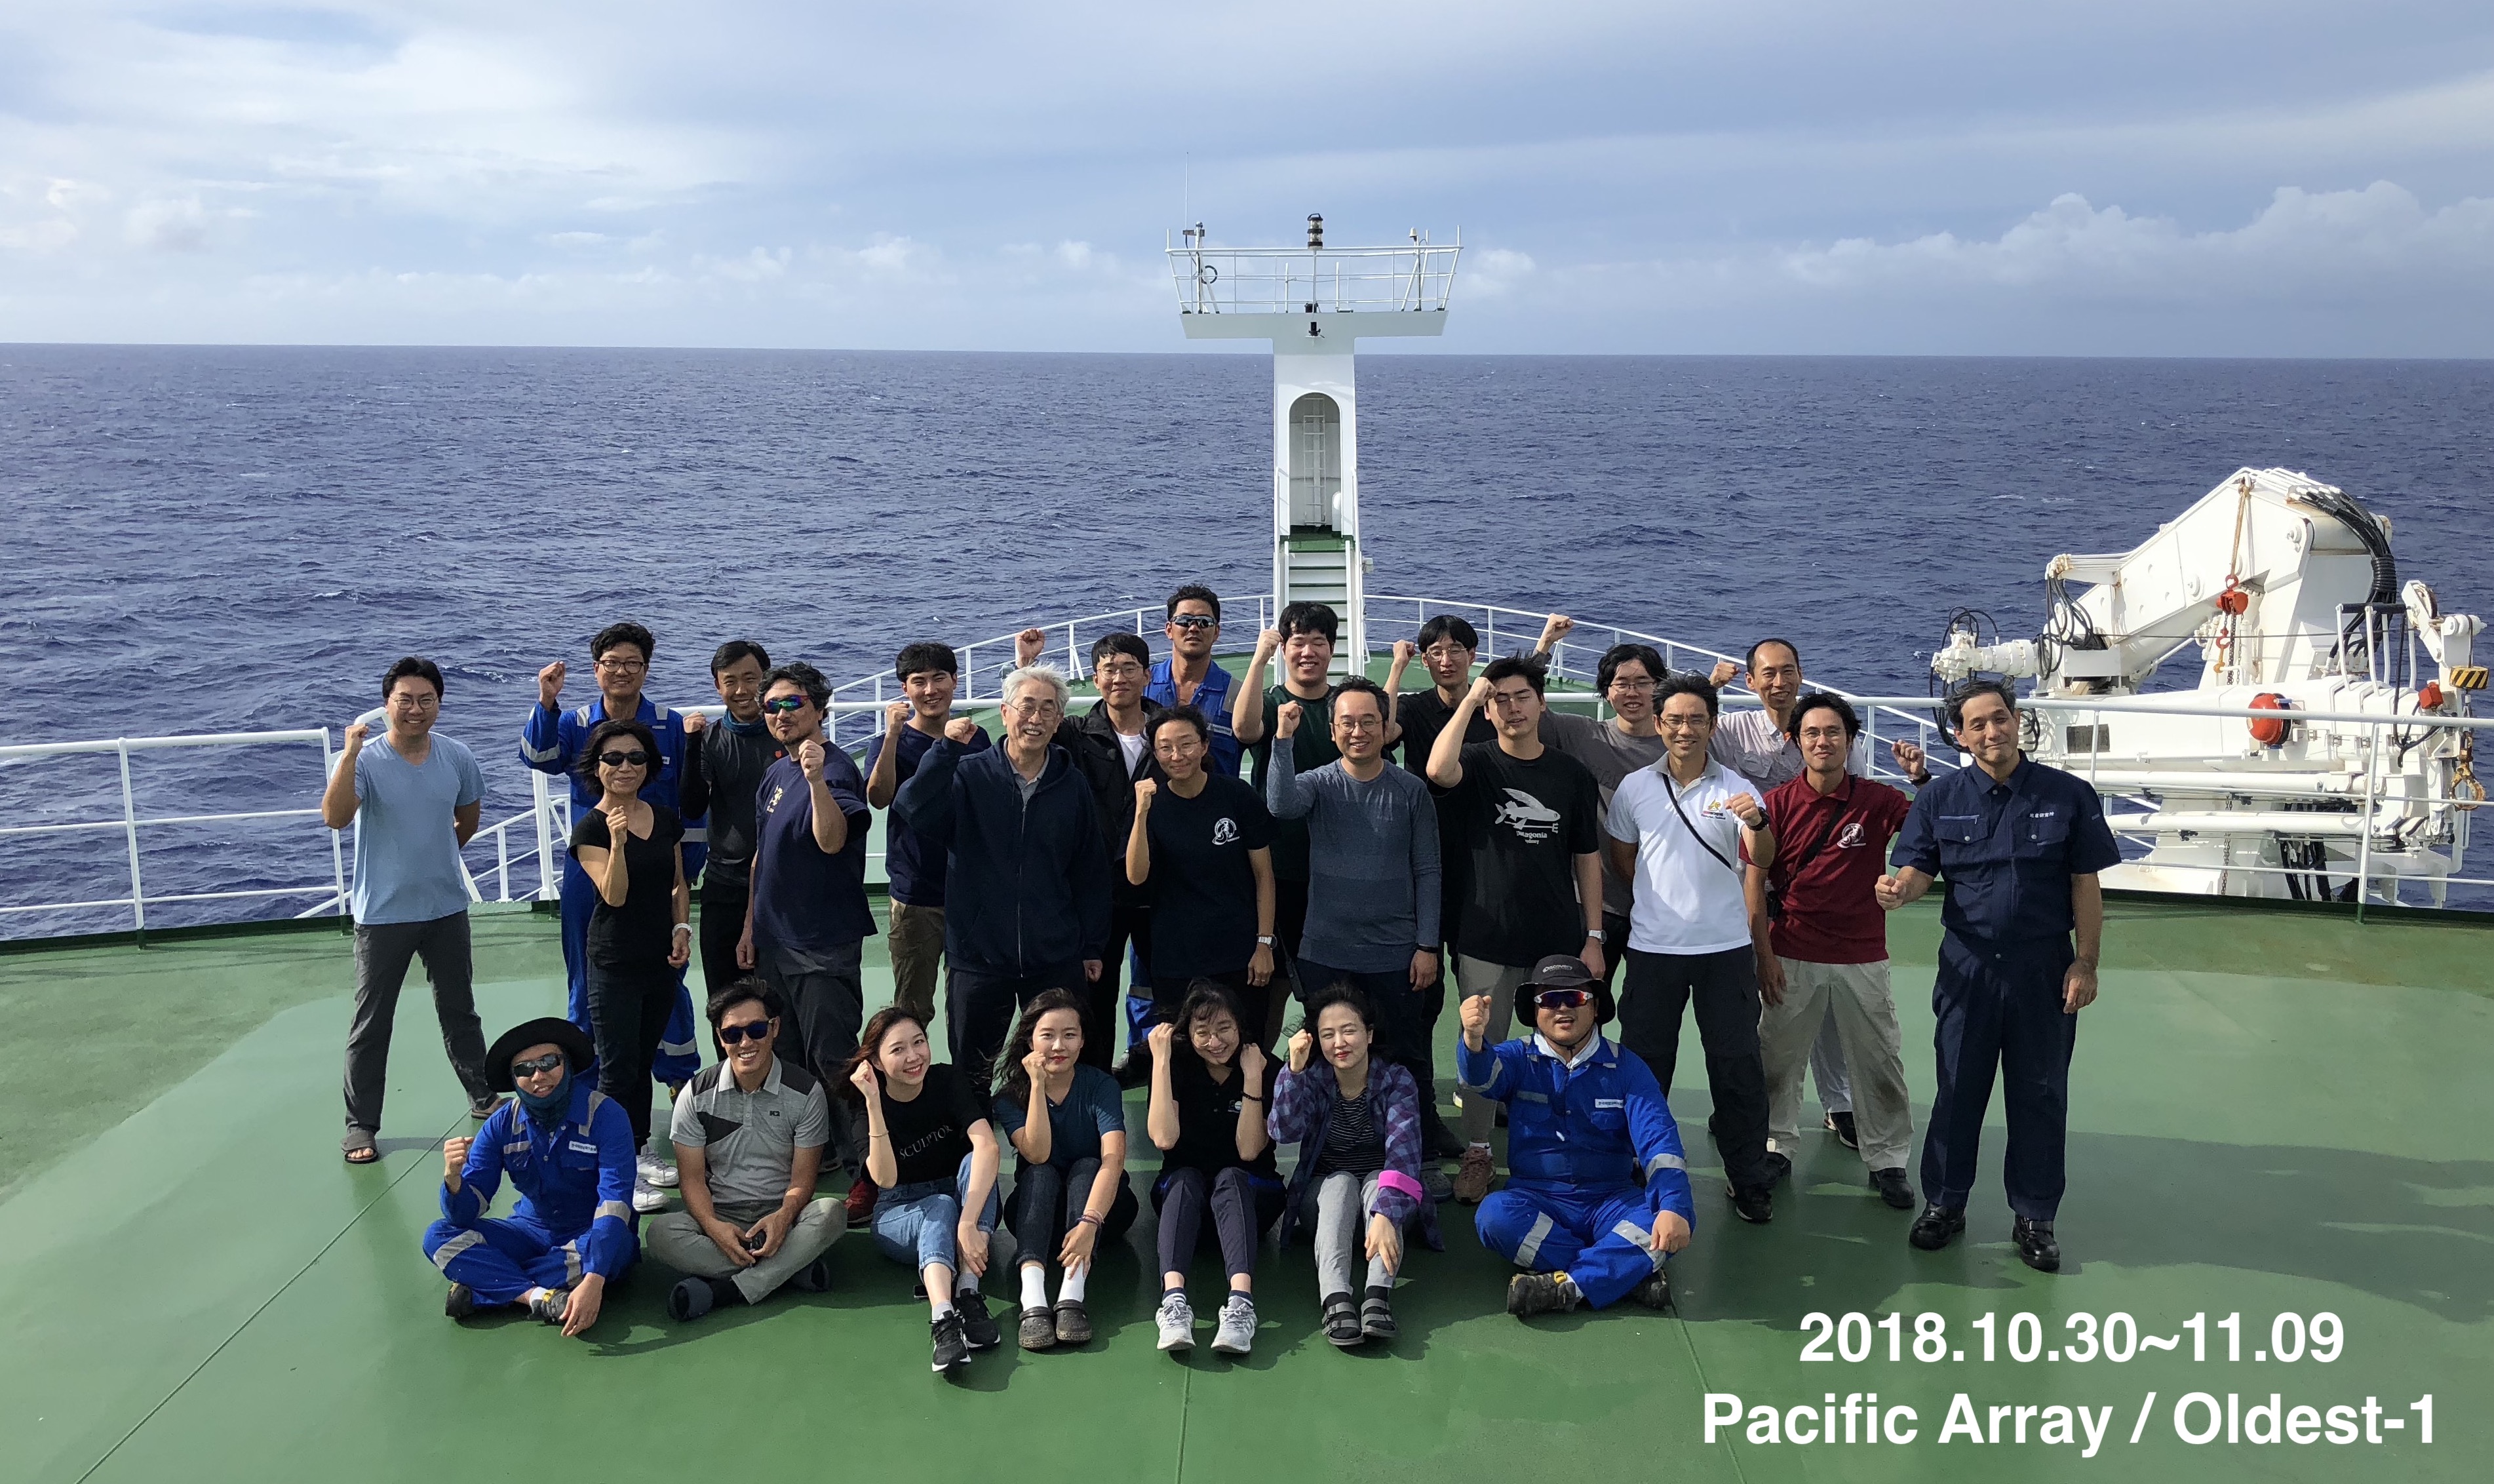 Oldest-1 deployment cruise group photo